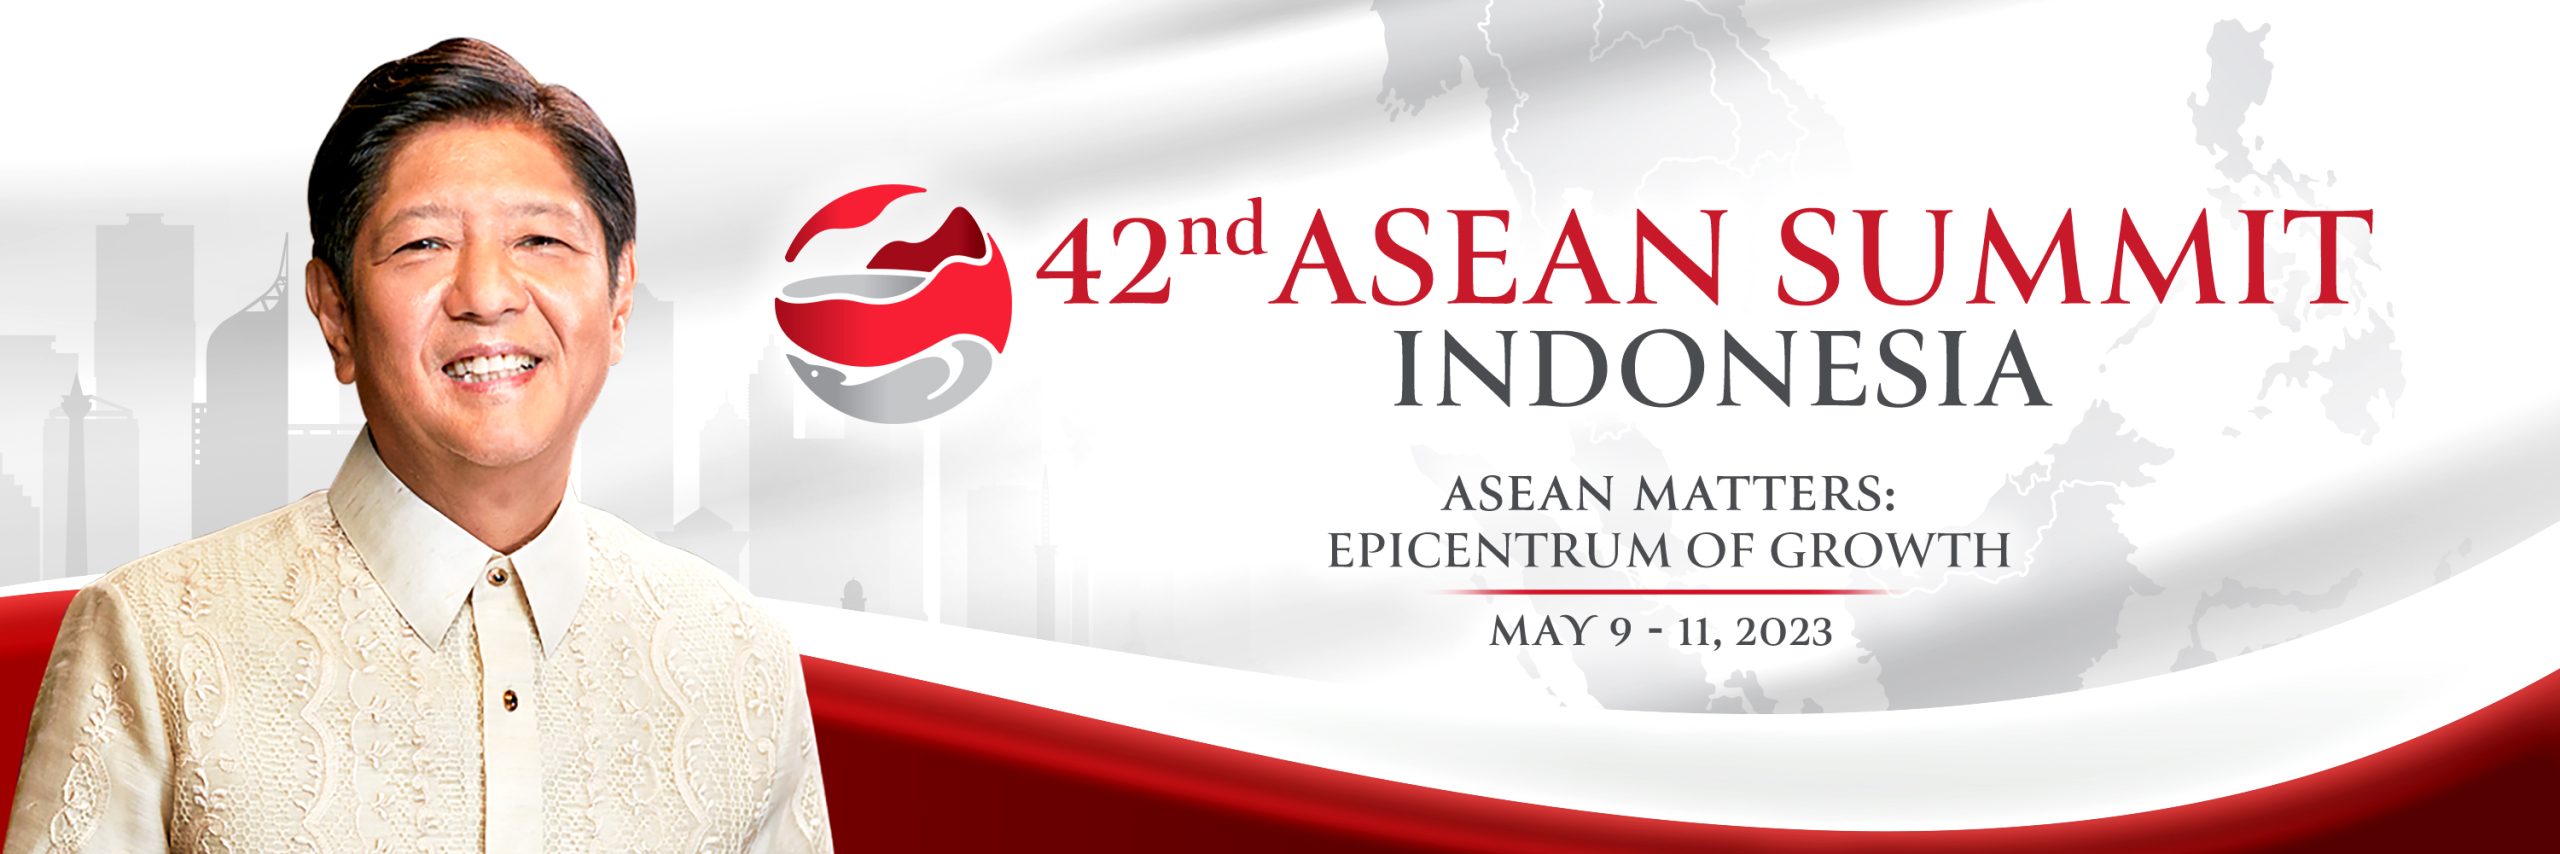 42nd ASEAN Summit in Indonesia